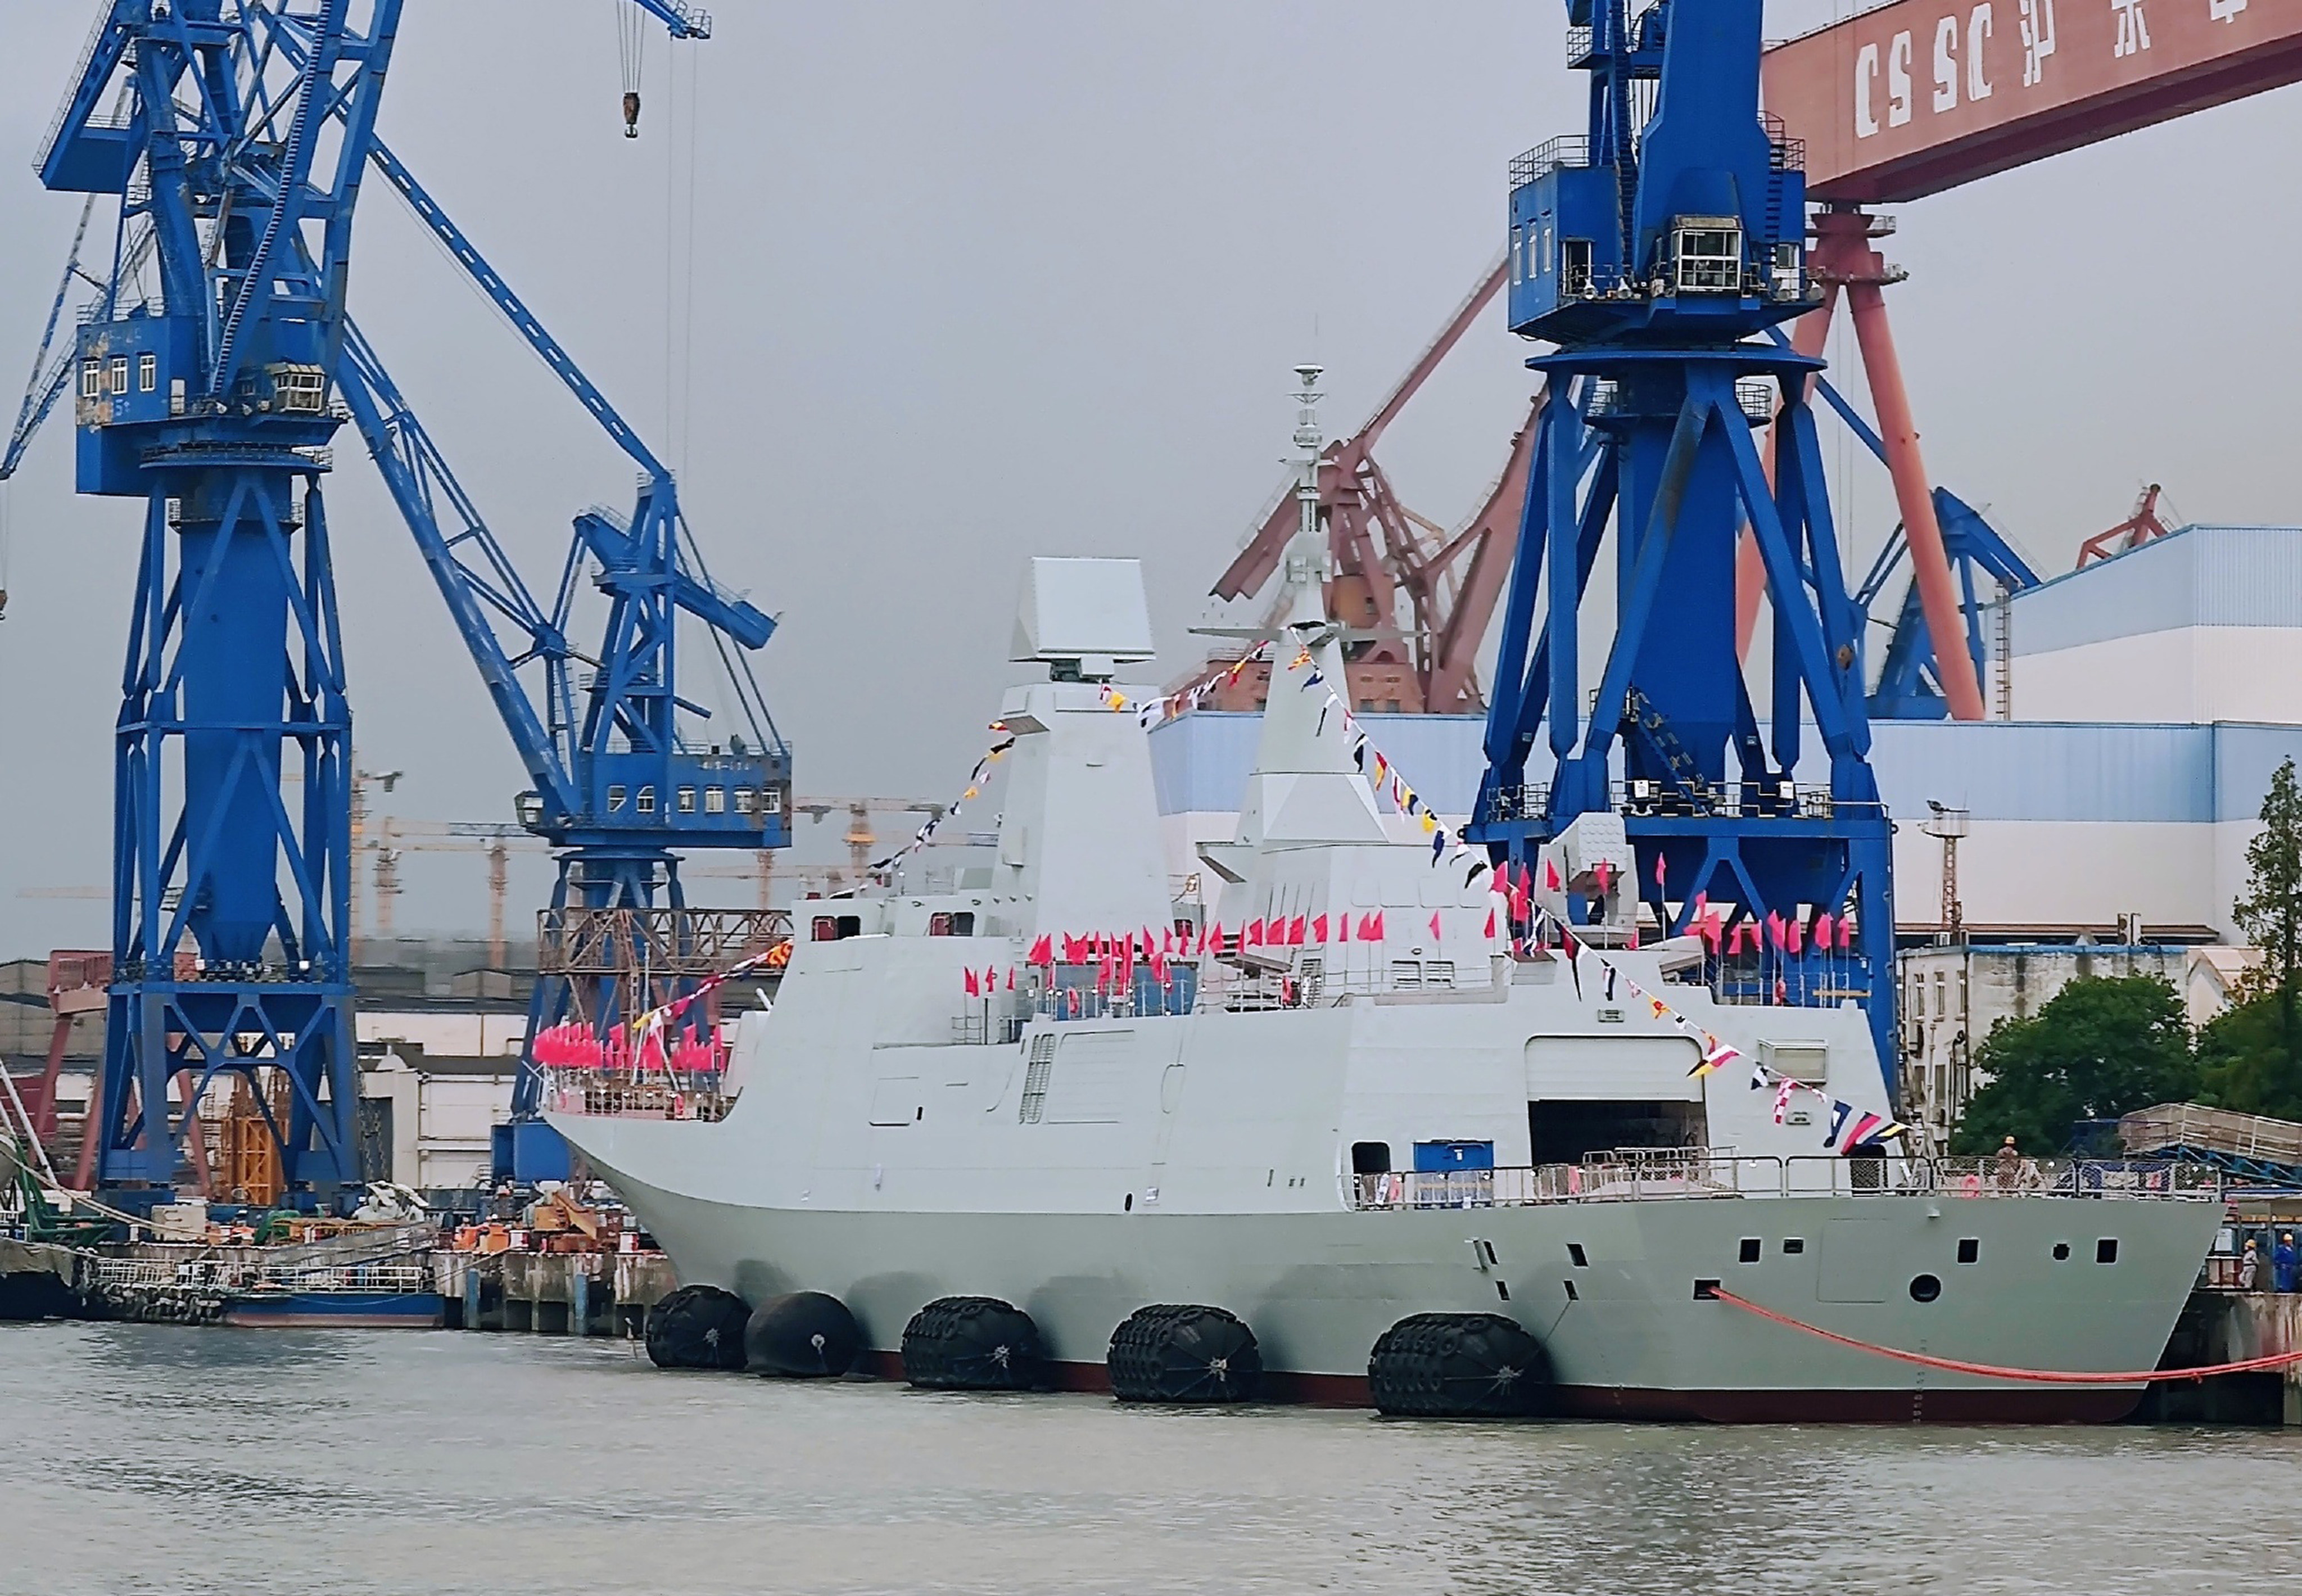 Photos of China’s state-owned Hudong-Zhonghua Shipbuilding docks posted online suggest the Type 054 frigate is ready for launch. Photo: Weibo